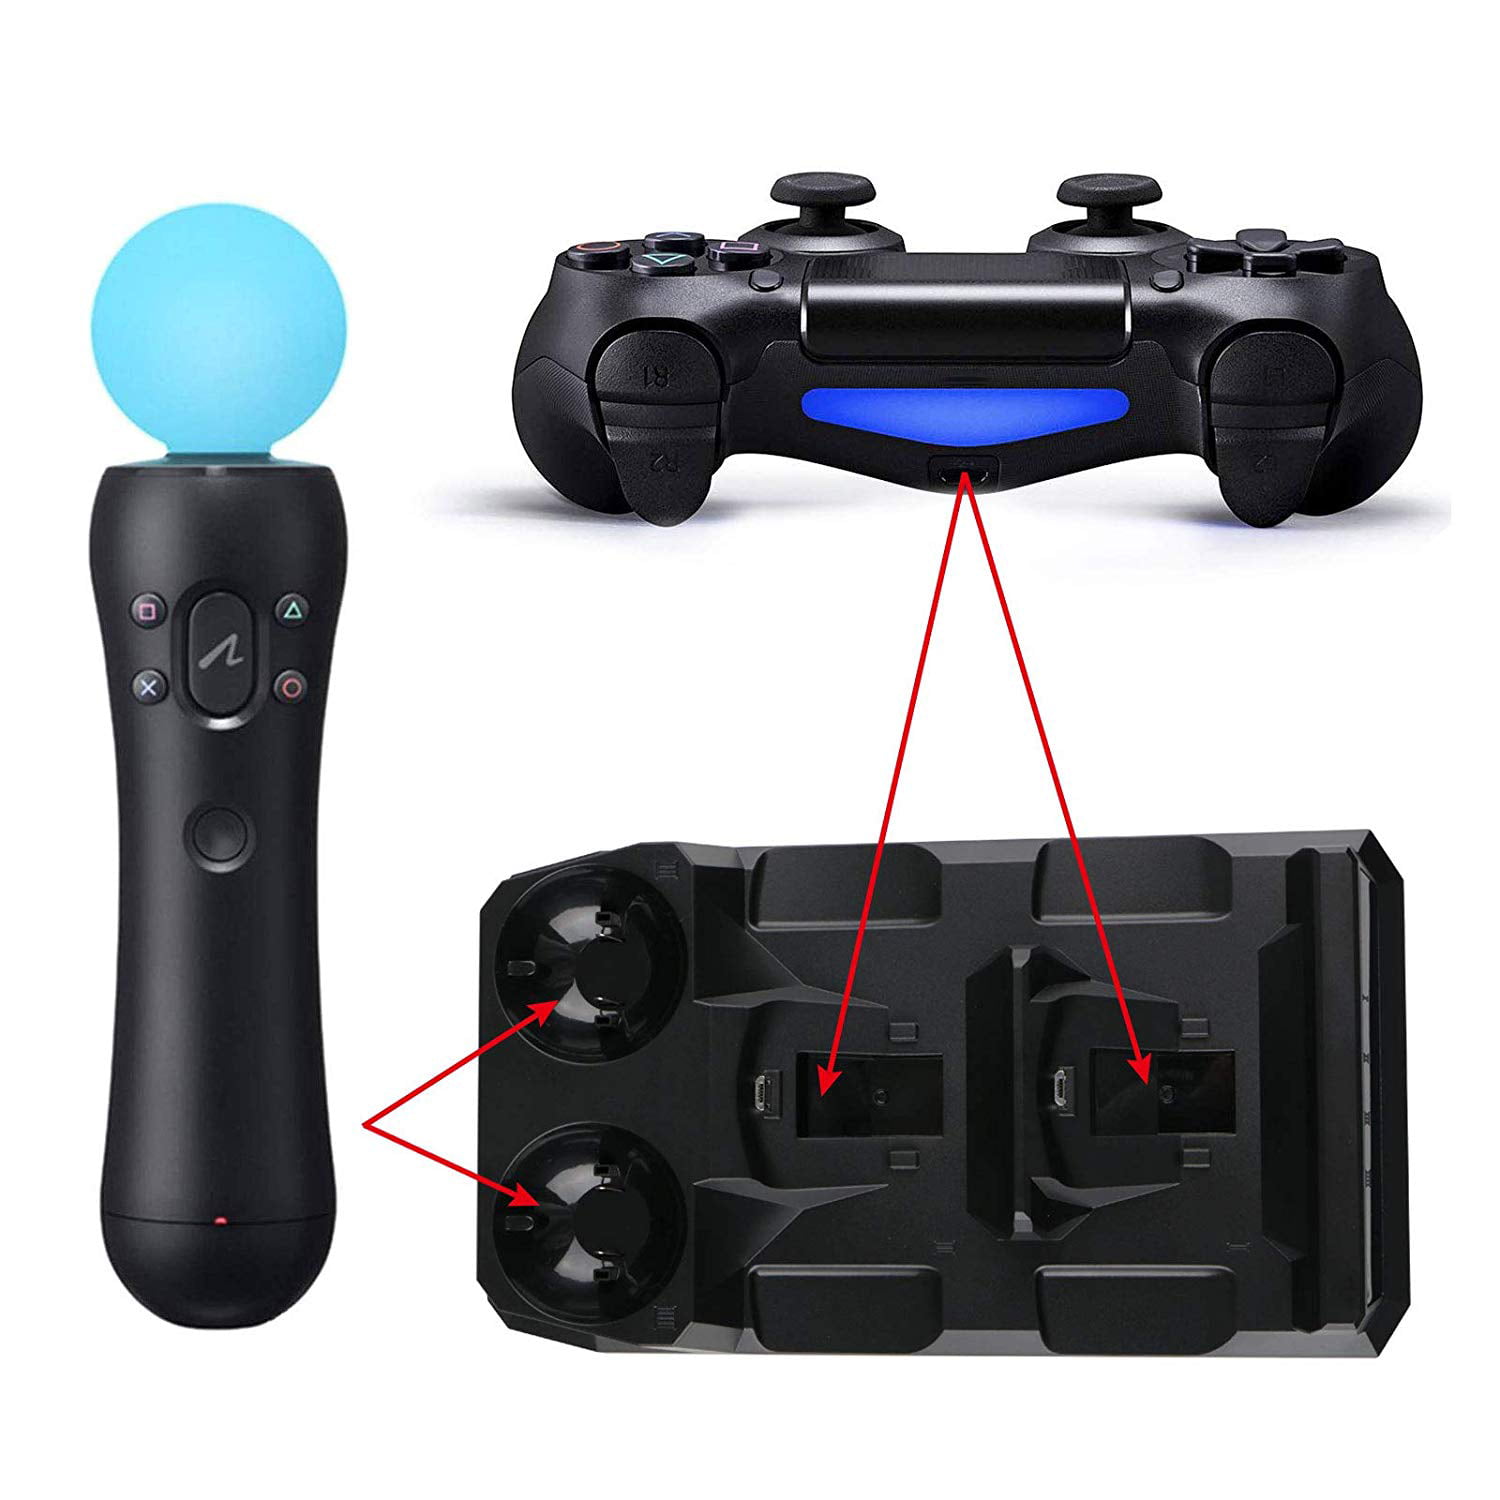 playstation 3 move controller work on ps4